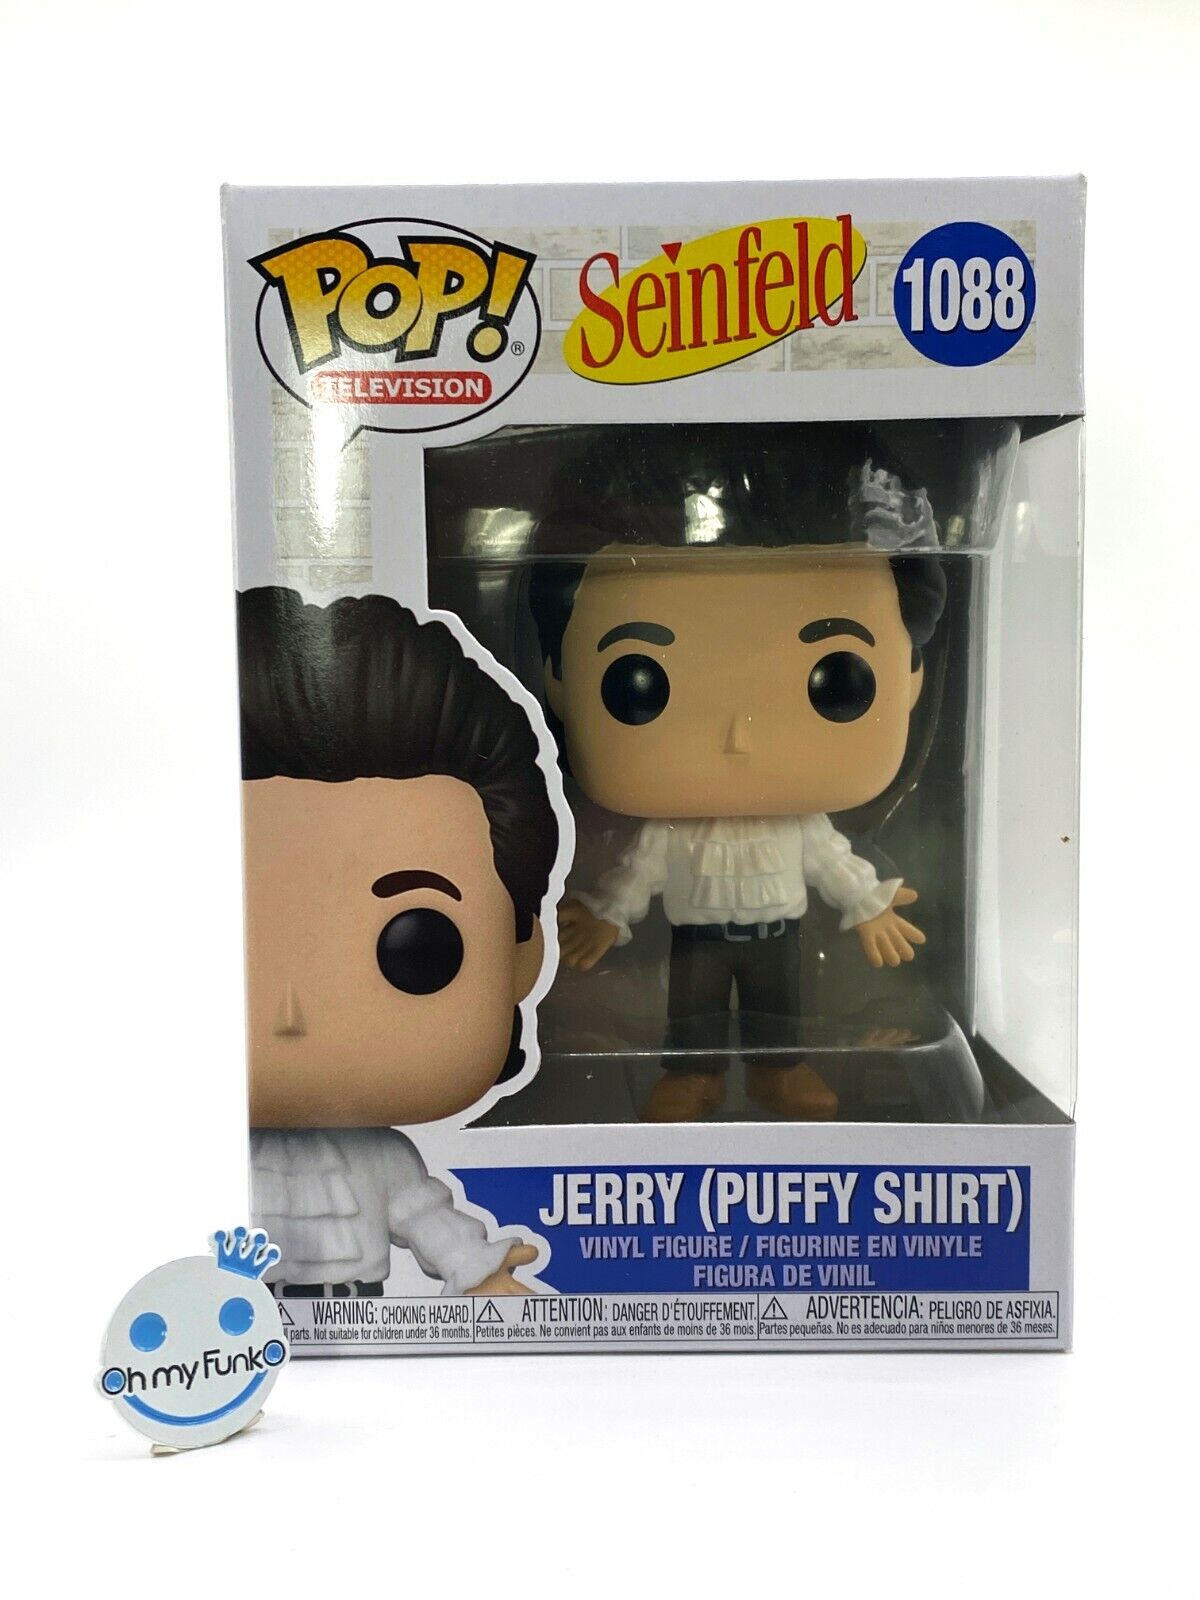 NEW pop Funko Television Seinfeld 1088 Jerry with Puffy Shirt -FREE PROTECTOR